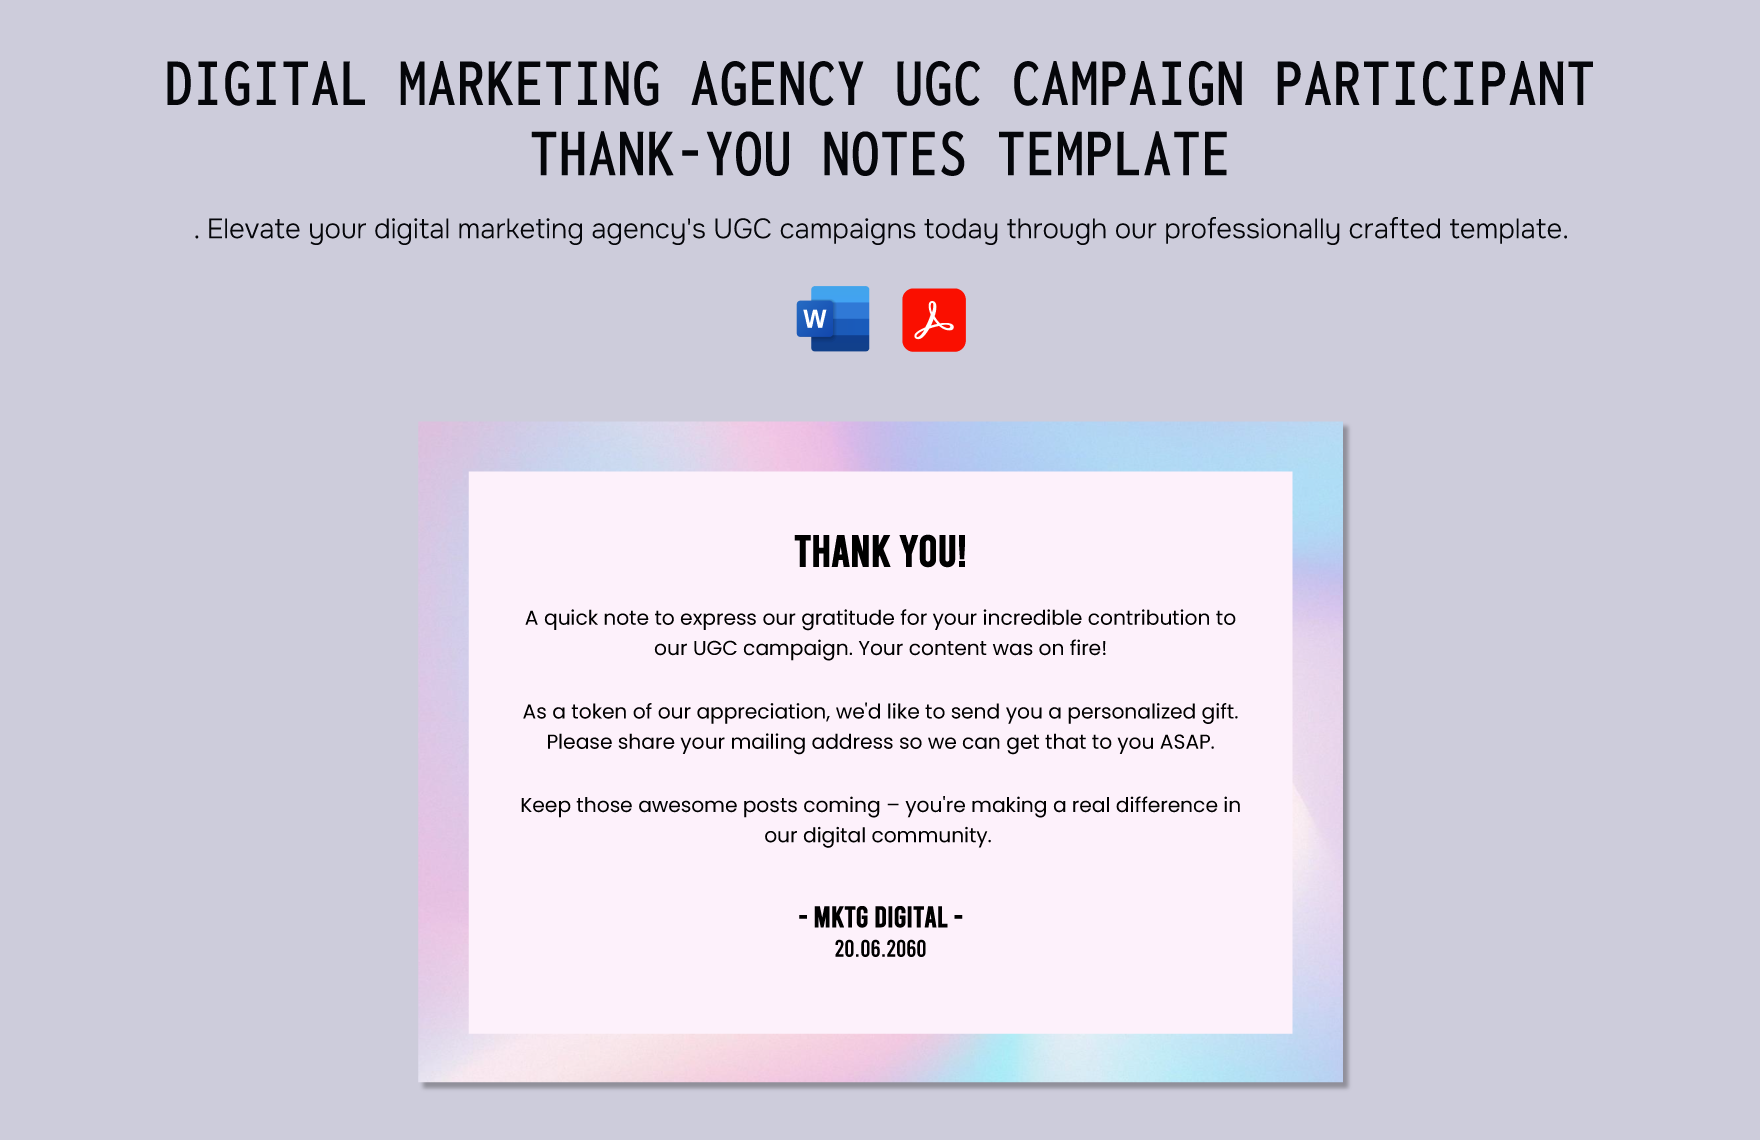 Digital Marketing Agency UGC Campaign Participant Thank-You Notes Template